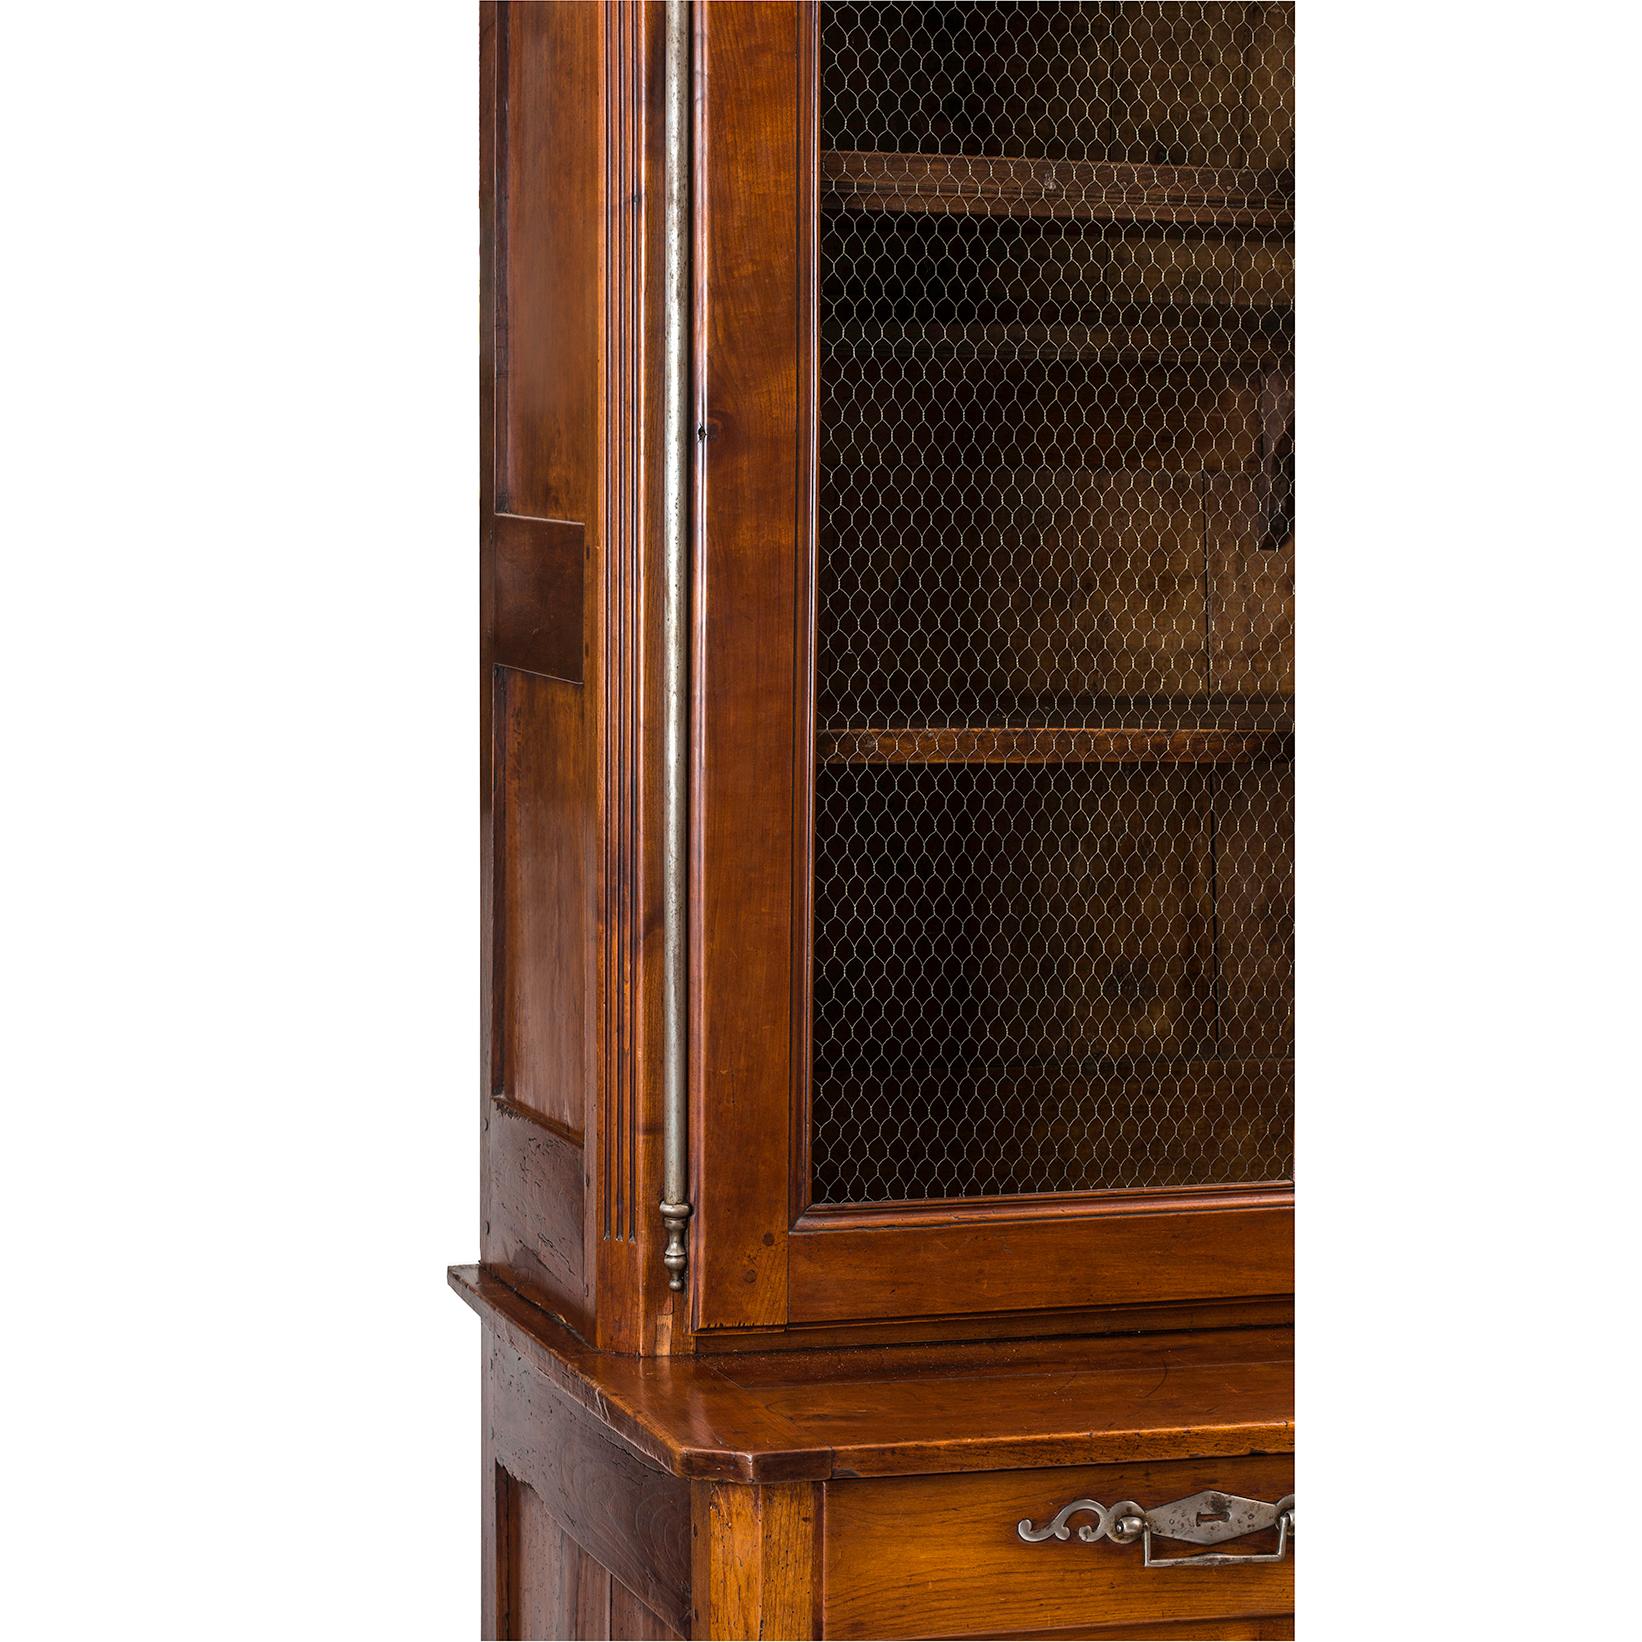 19th Century Cherrywood French Cabinet In Good Condition For Sale In Summerland, CA